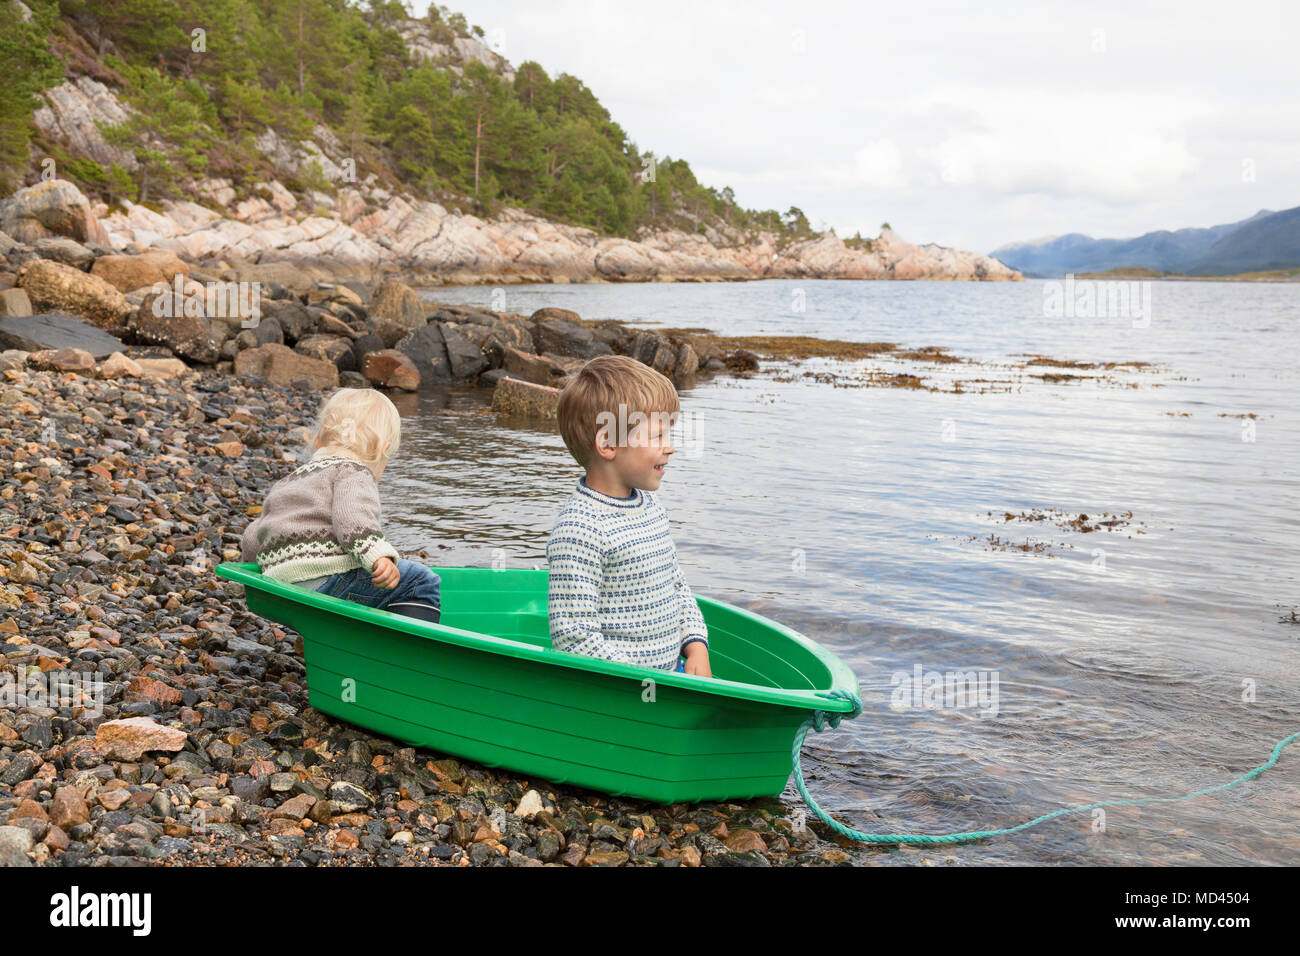 Boys in green boat at fjord water's edge, Aure, More og Romsdal, Norway Stock Photo